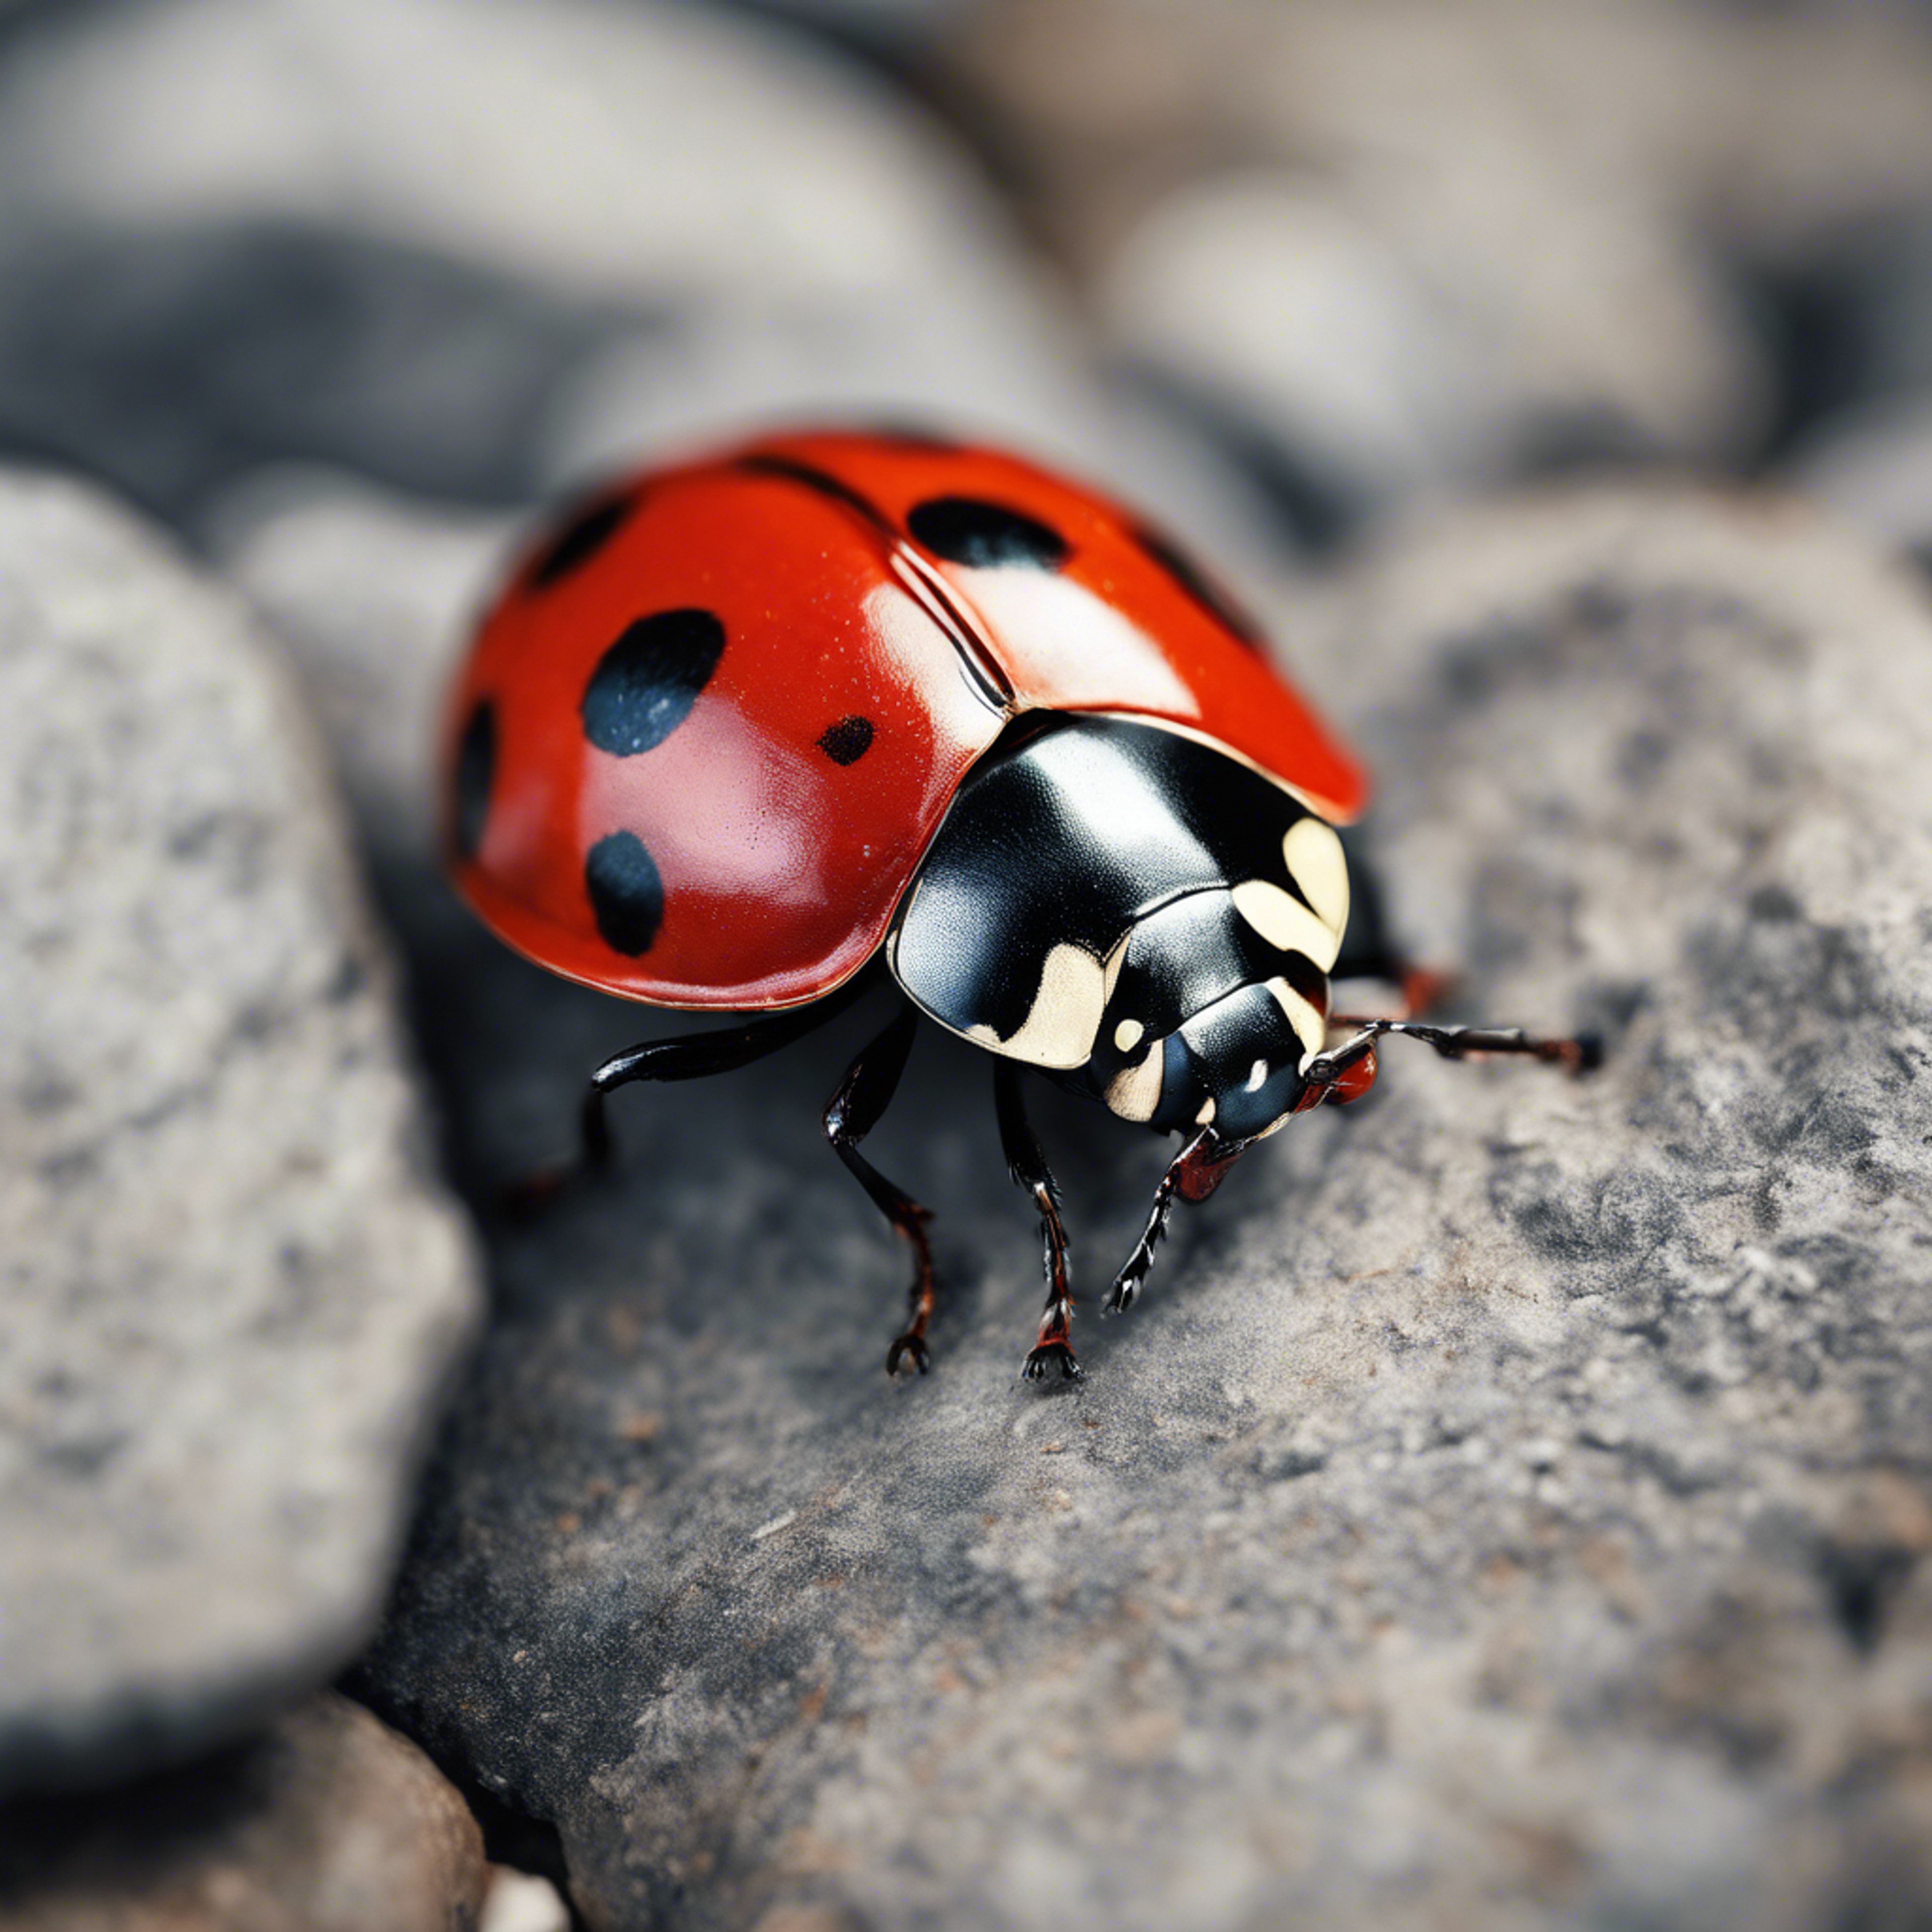 A fearless ladybug with bright red wings crawling over a dull, grey stone. Тапет[cb02e673ce6f479eab40]